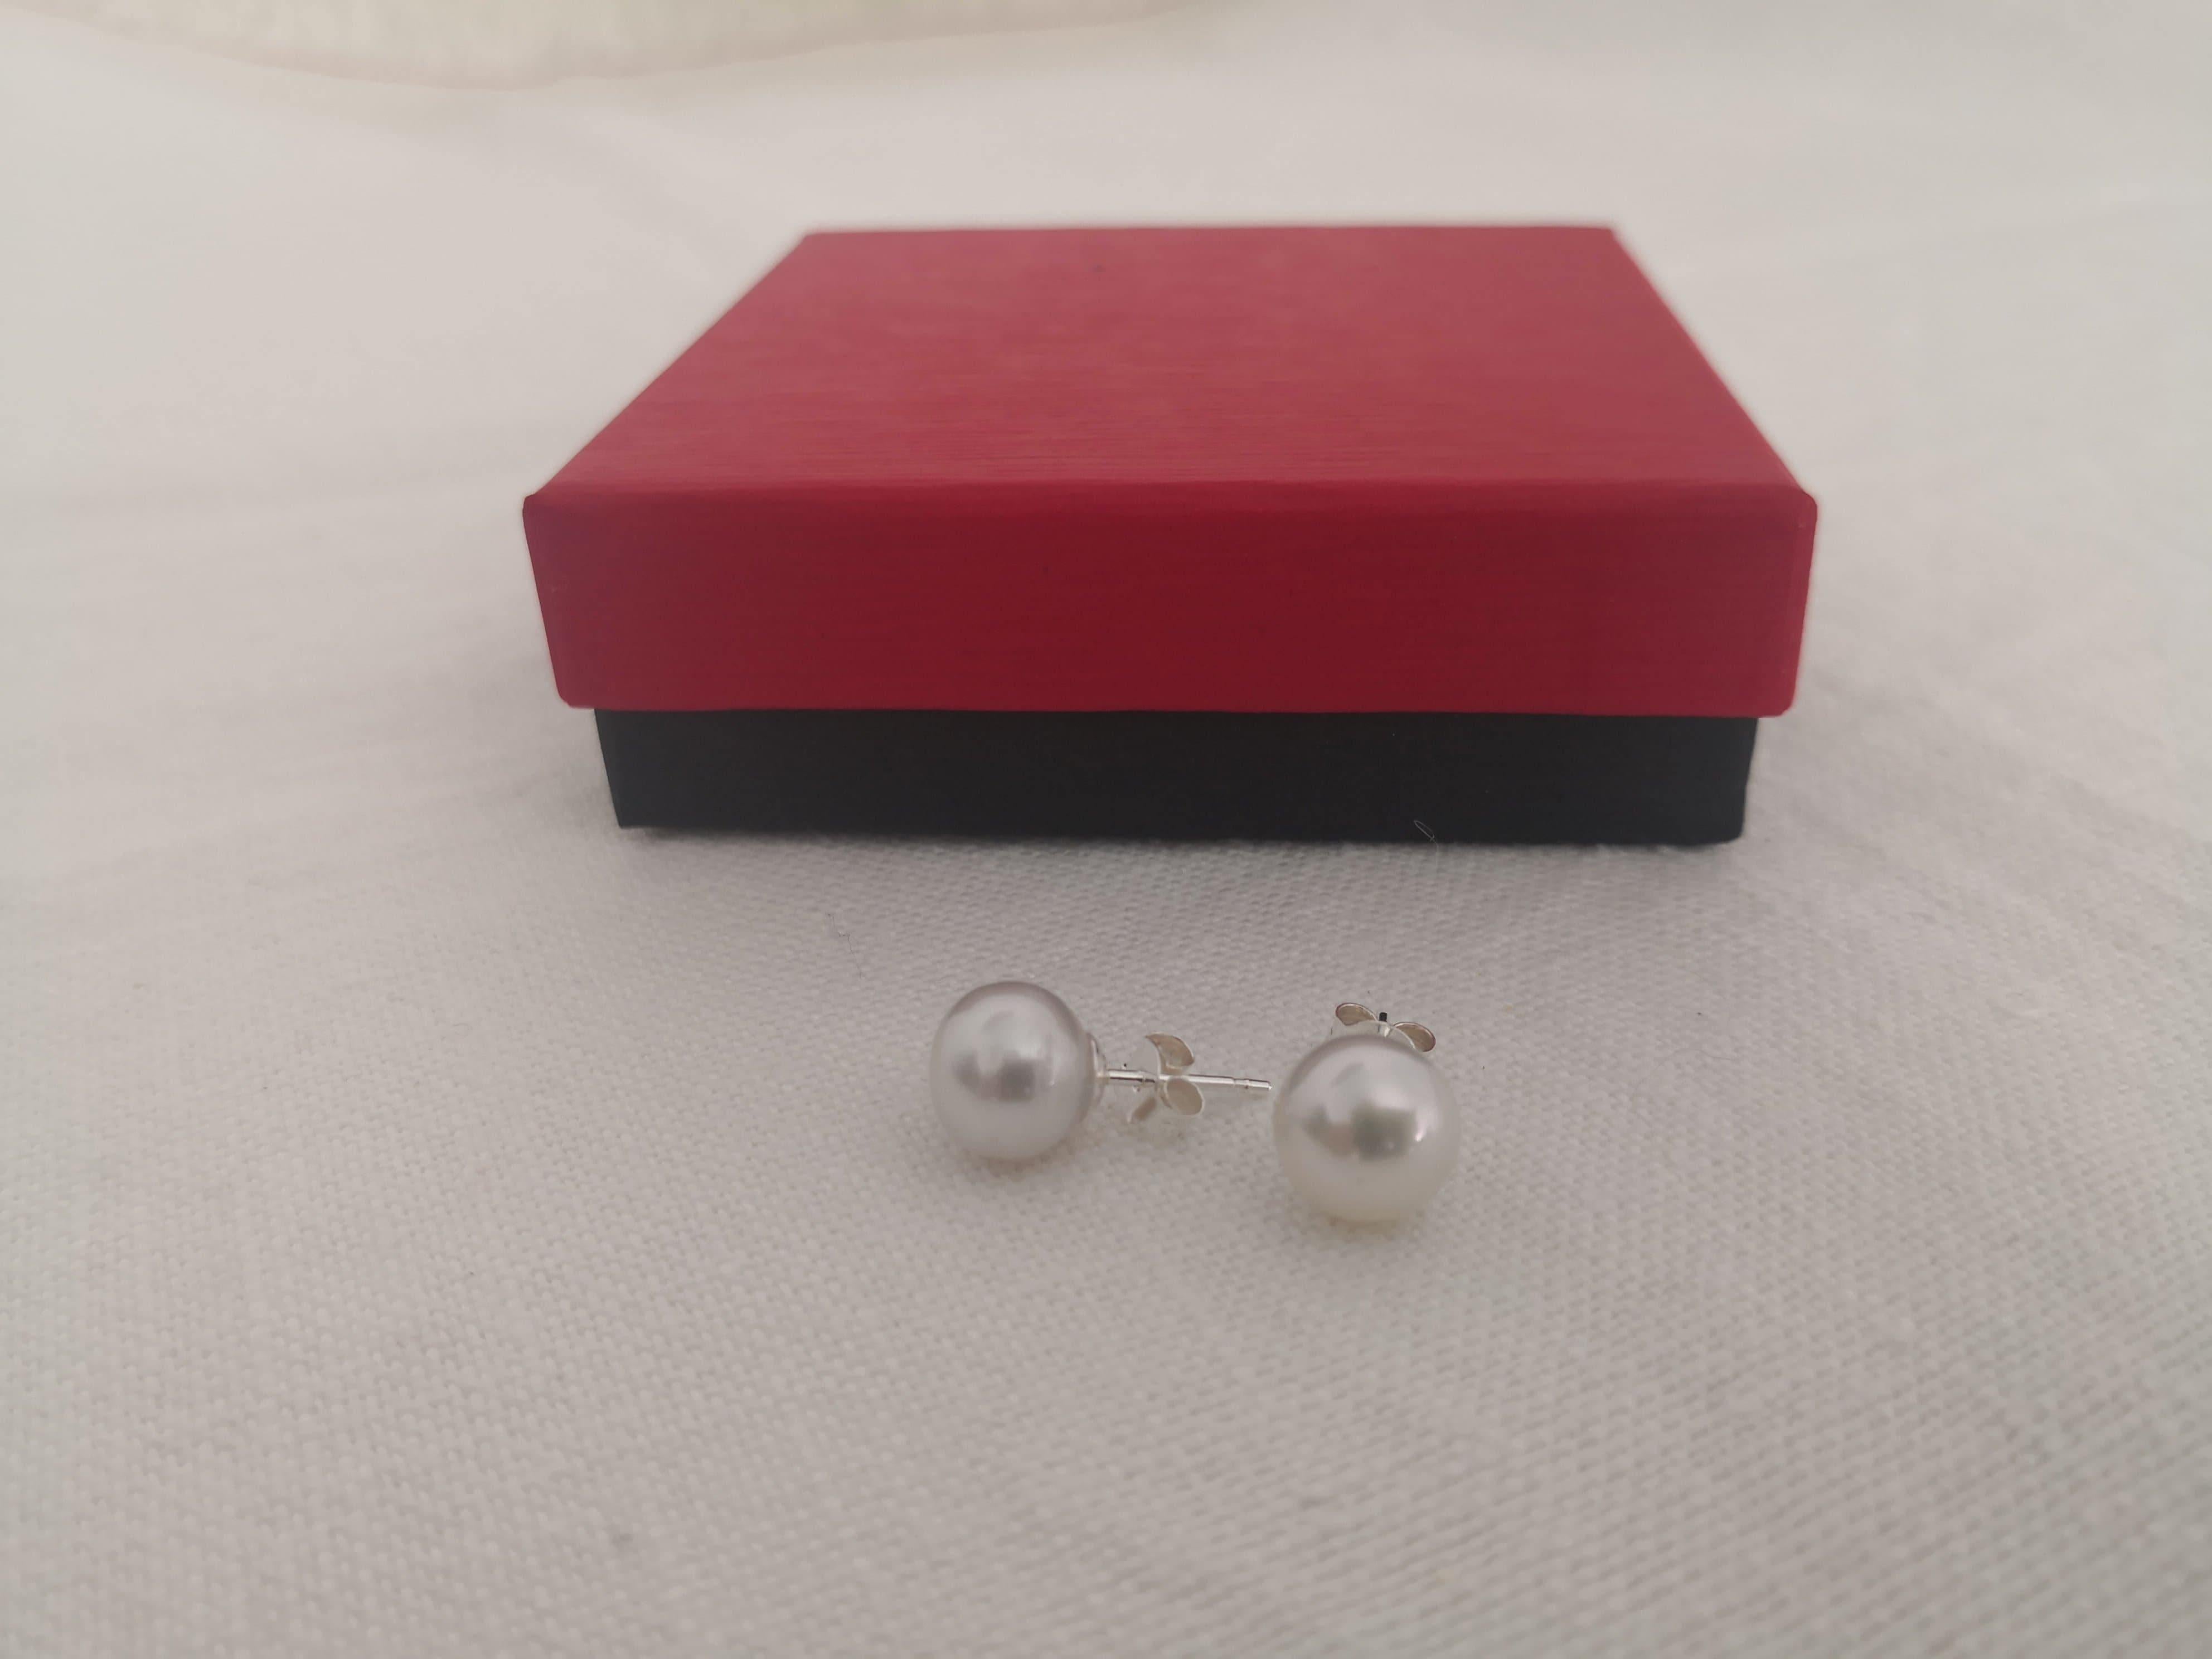 - Natural Color Genuine South Sea Pearls Stud earrings

- Pearls Origin: Indonesian ocean waters

- Produced by Pinctada Maxima Oyster

- High-Quality Pearls

- Mounting manufactured in Sterling Silver 925 mls in EU.

- Size of Pearls 9-10 mm in